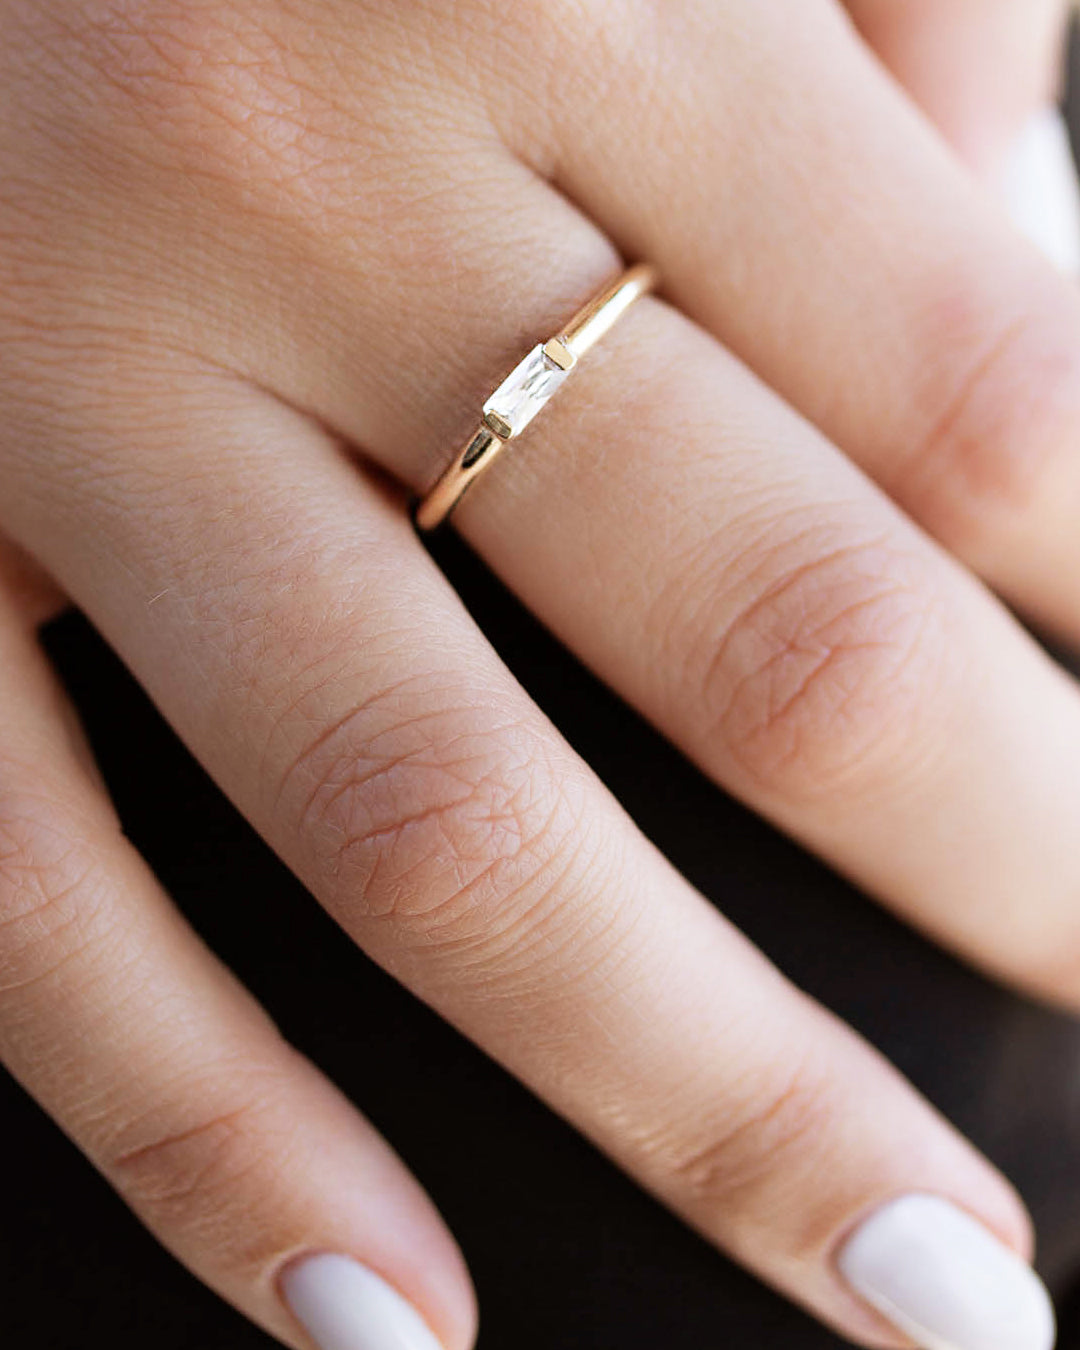 A  delicate 14k yellow gold engagement ring, set with a 0.25 baguette cut white diamond. 